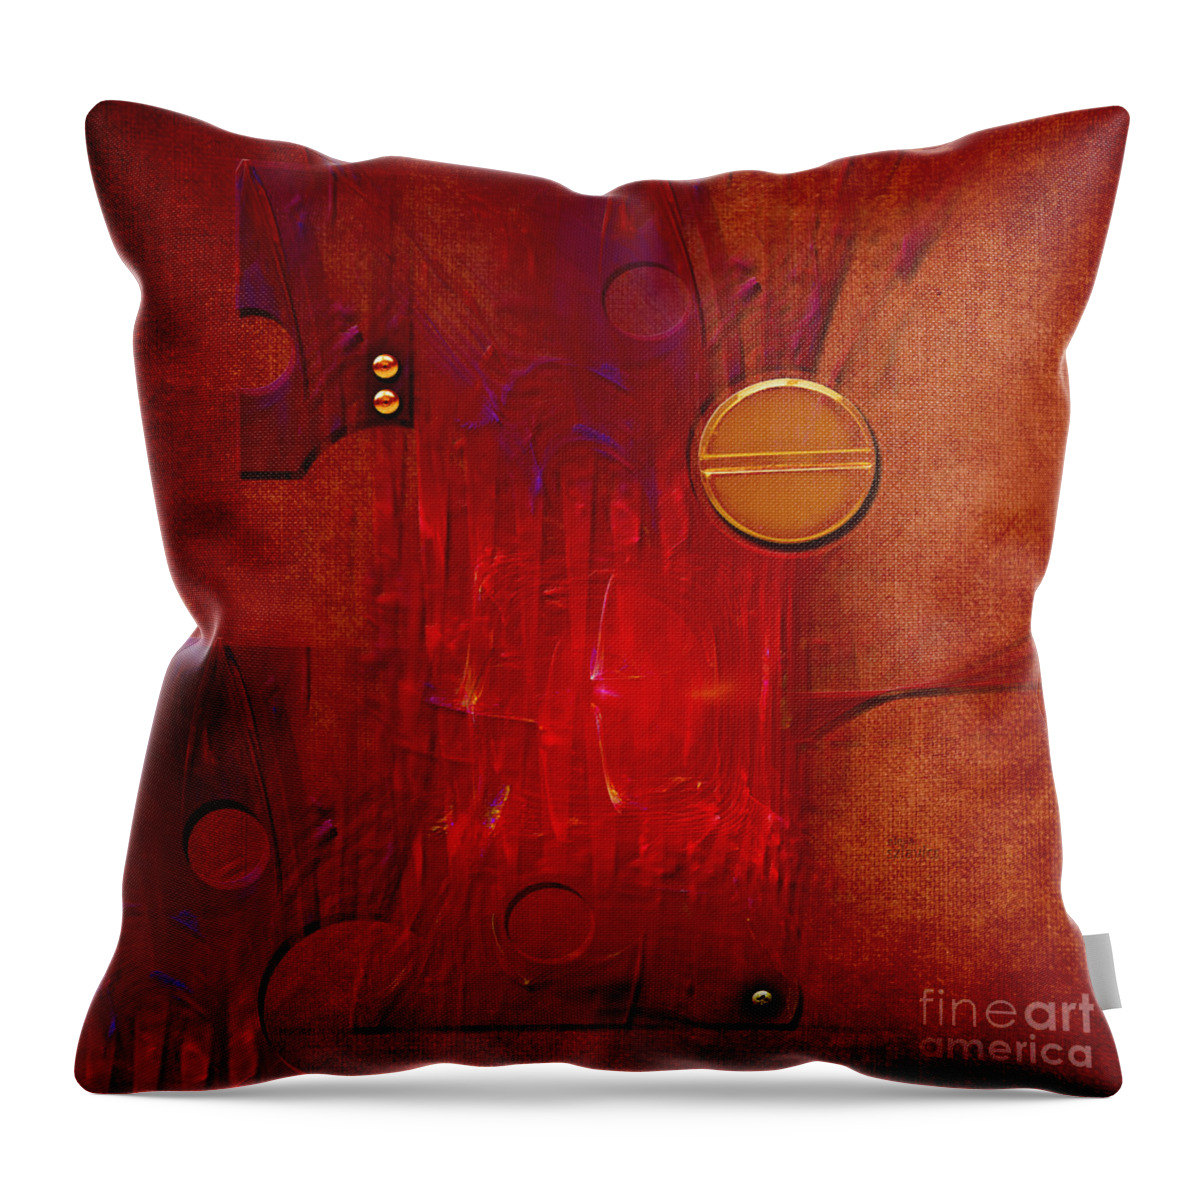 Square. Abstract Throw Pillow featuring the digital art Gear by Alexa Szlavics